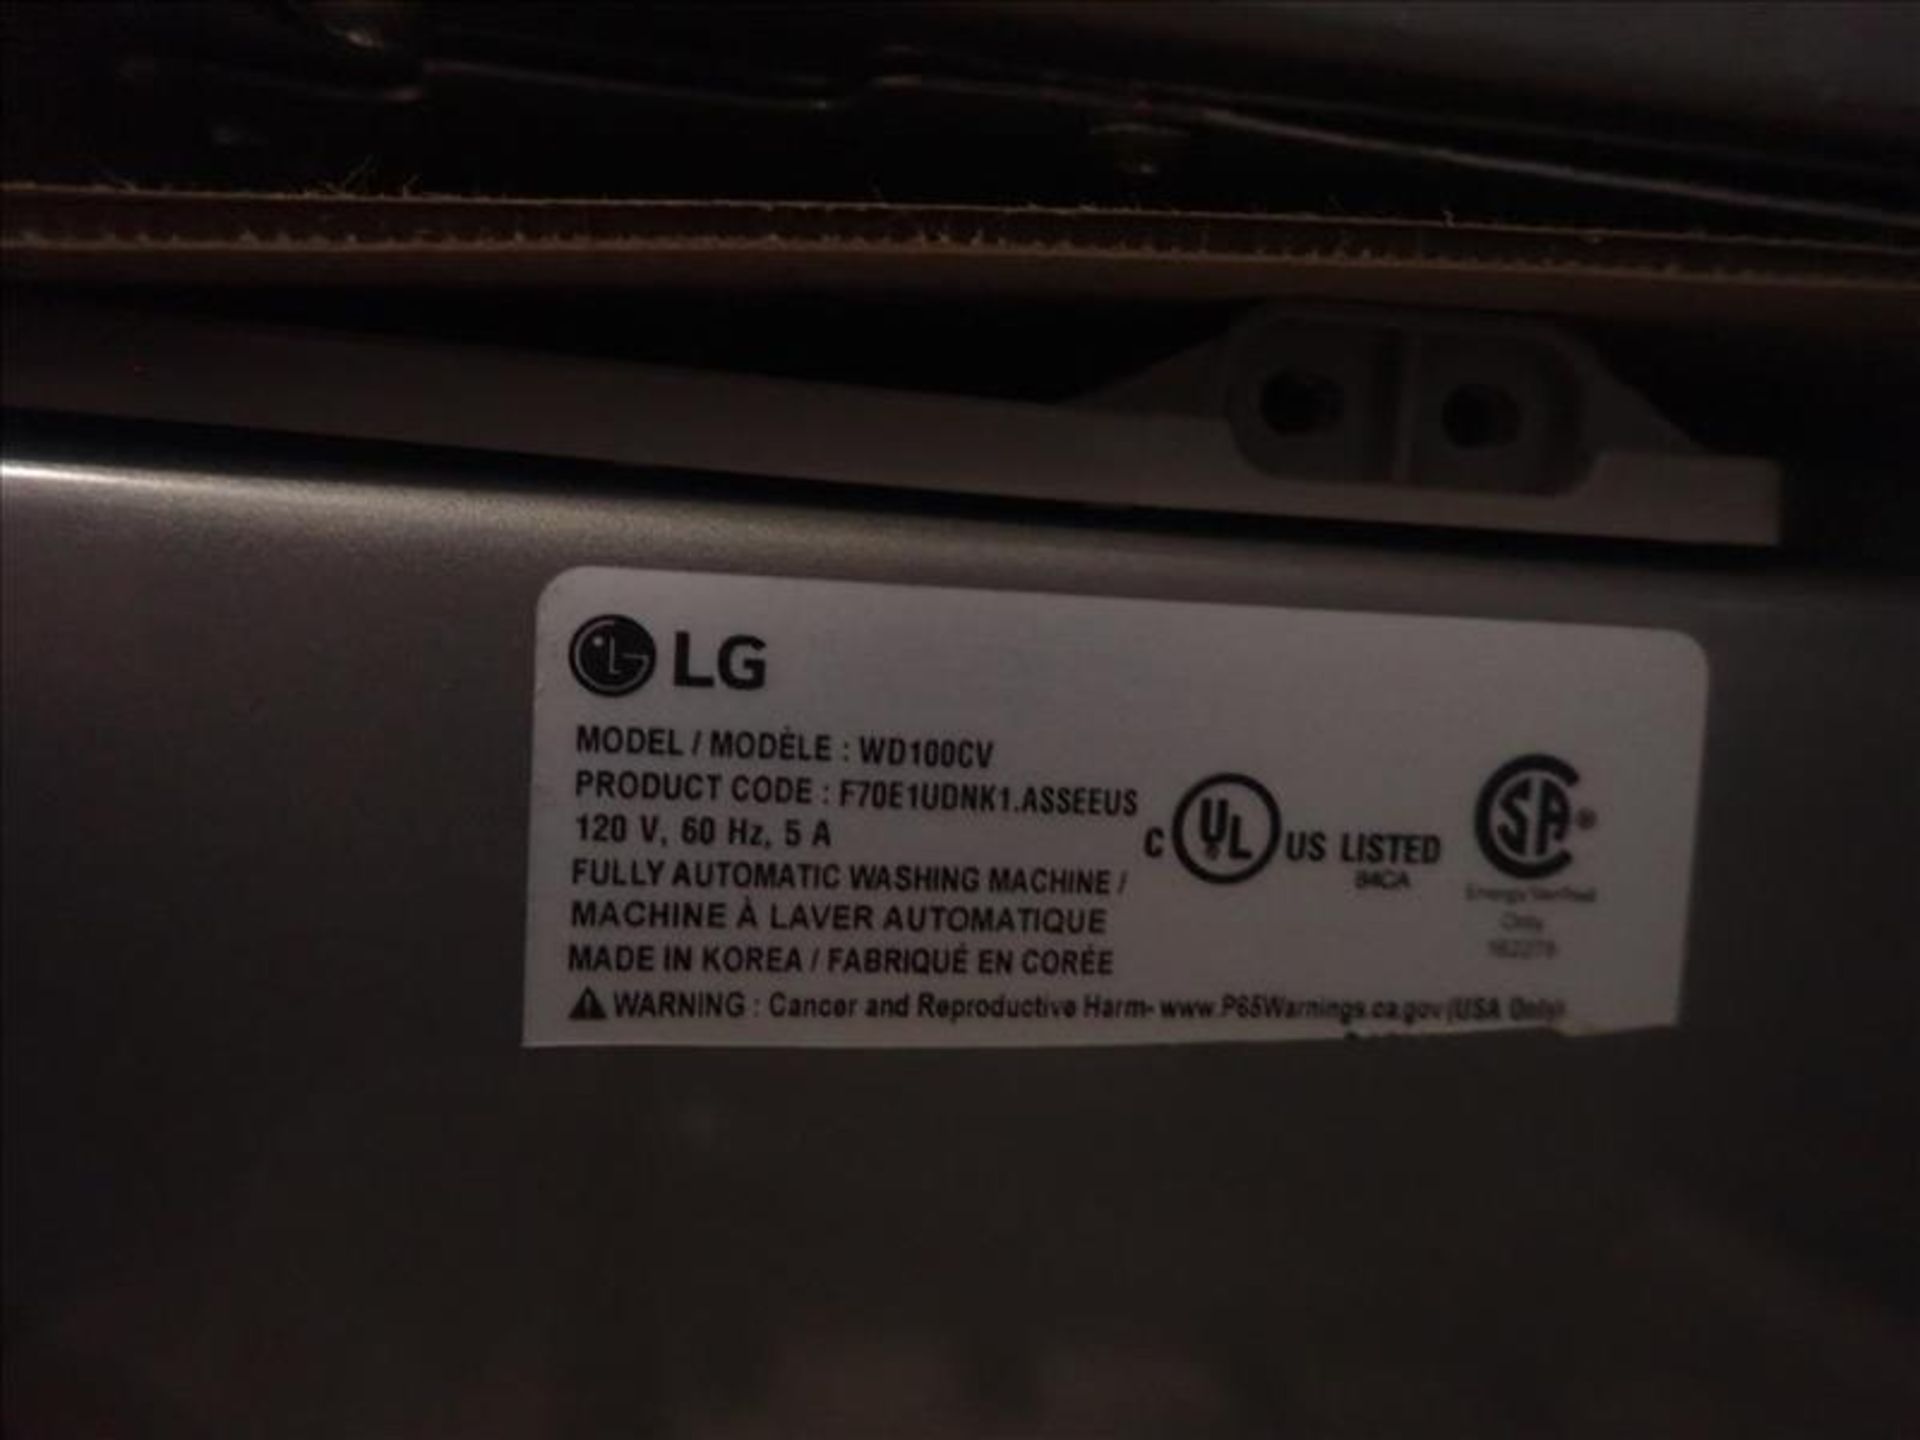 LG pedestal clothes washer, mod. WD100CV, stainless steel finish, T3 refurbished - Image 5 of 6